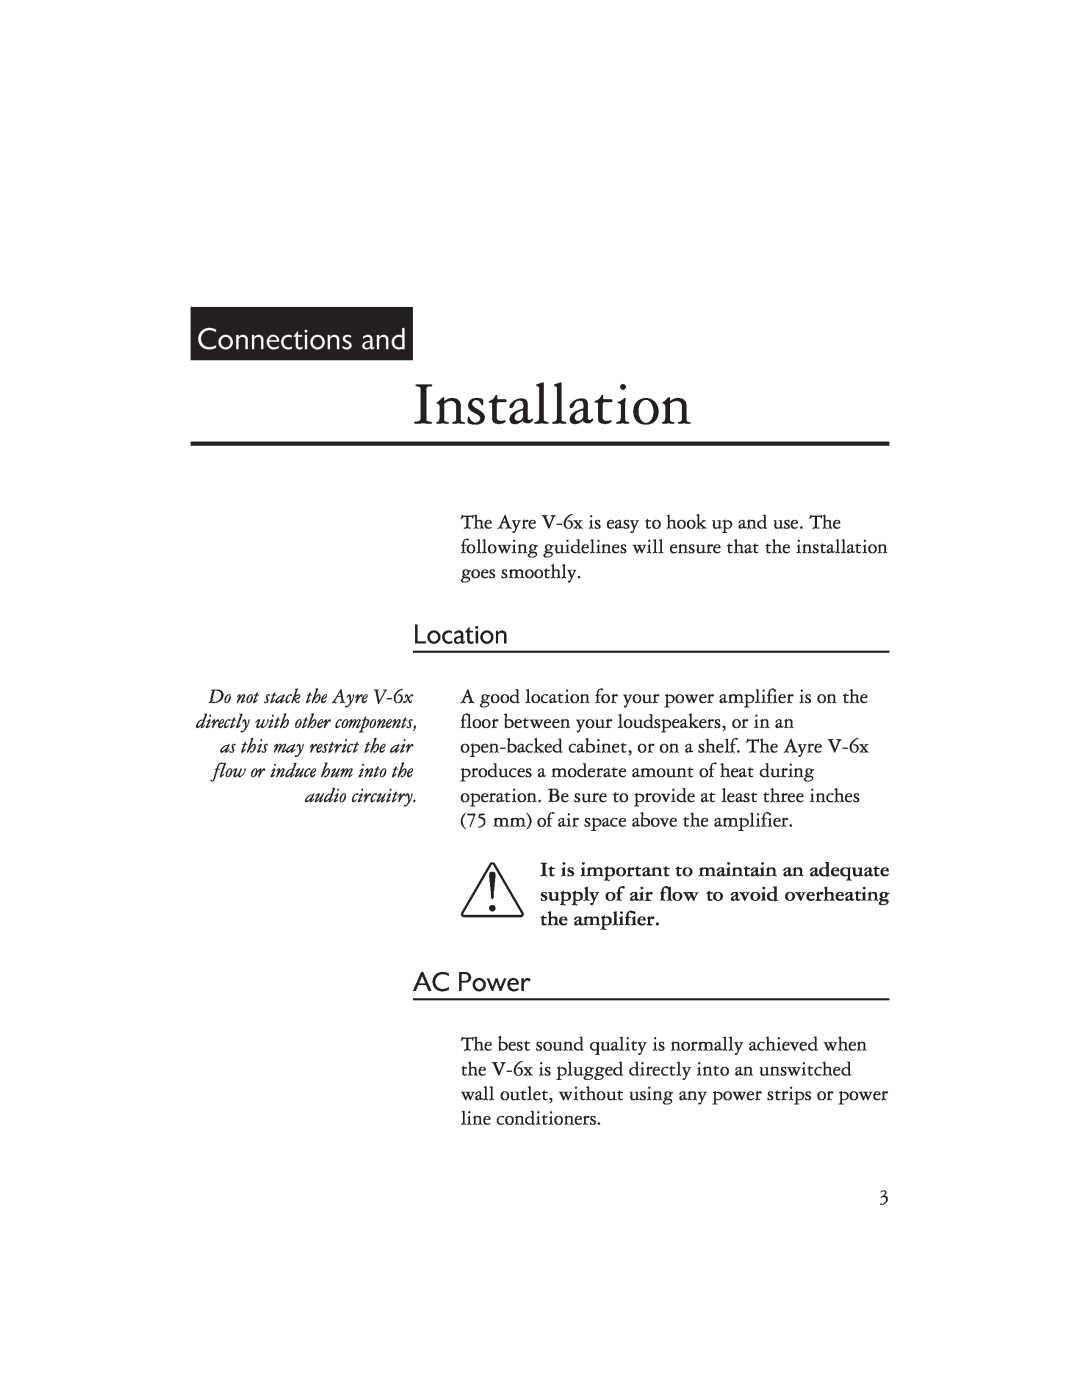 Ayre Acoustics V-6x owner manual Installation, Connections and, Location, AC Power 